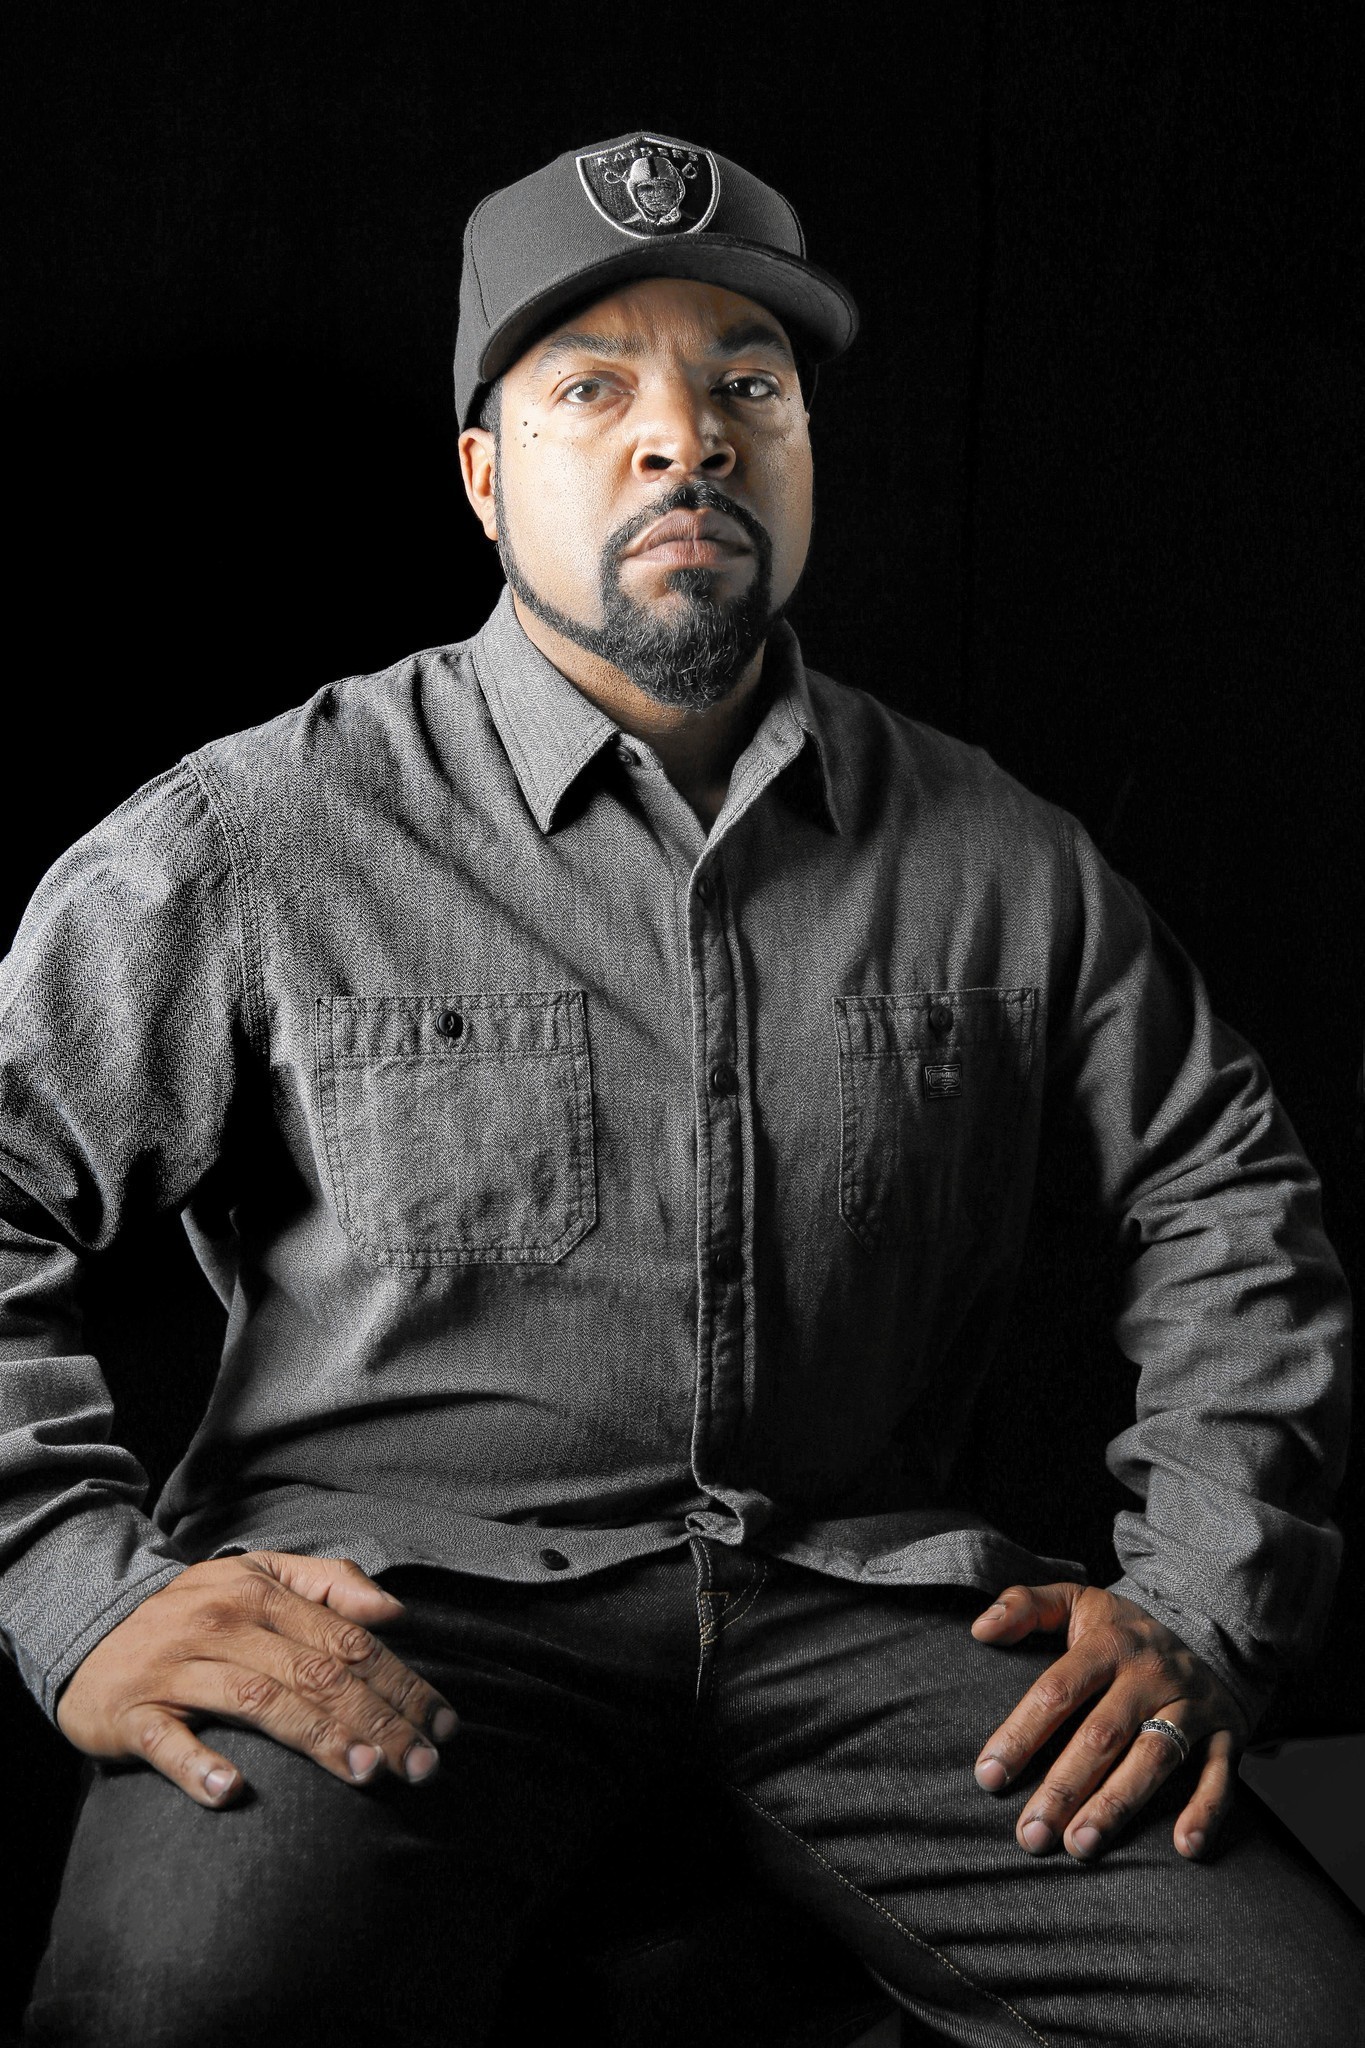 Between N.W.A's Rock Hall induction and his Coachella set, Ice Cube